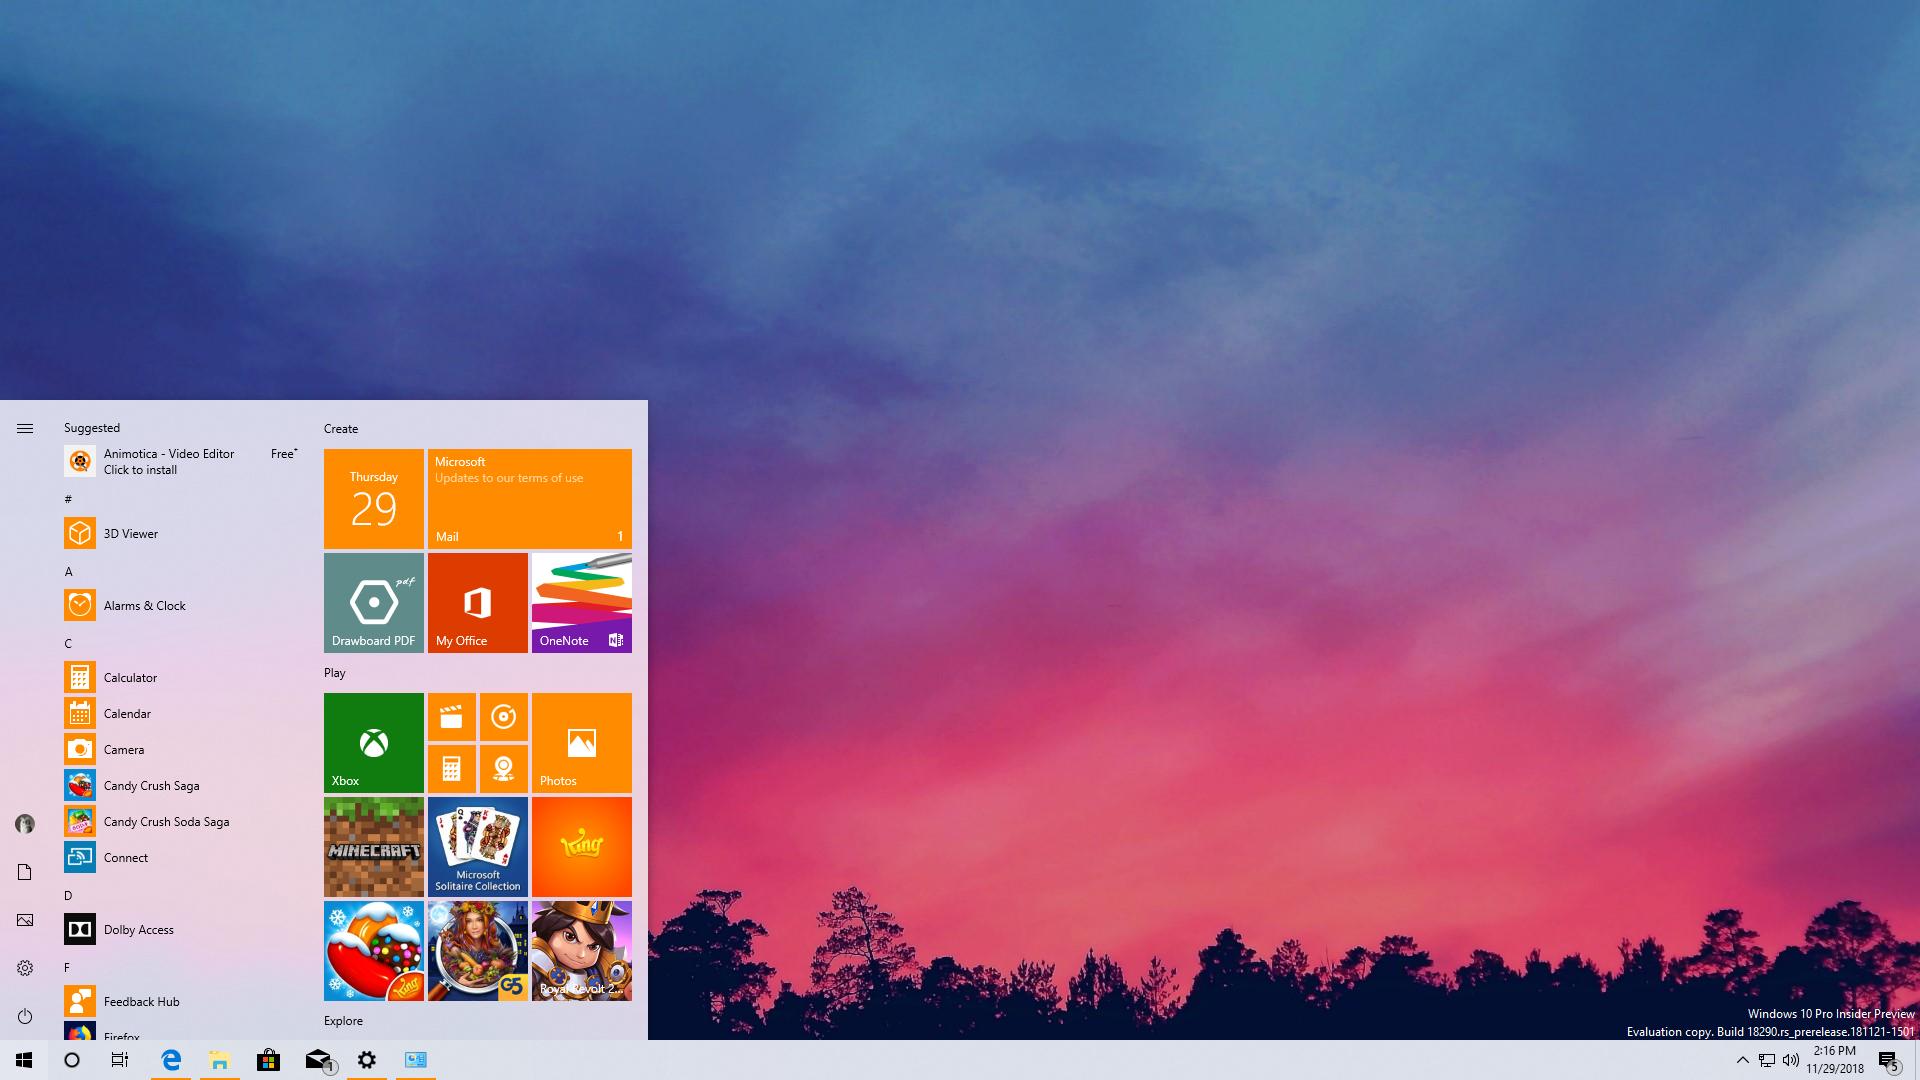 windows 10 19h1 all in one iso june 2019 free download